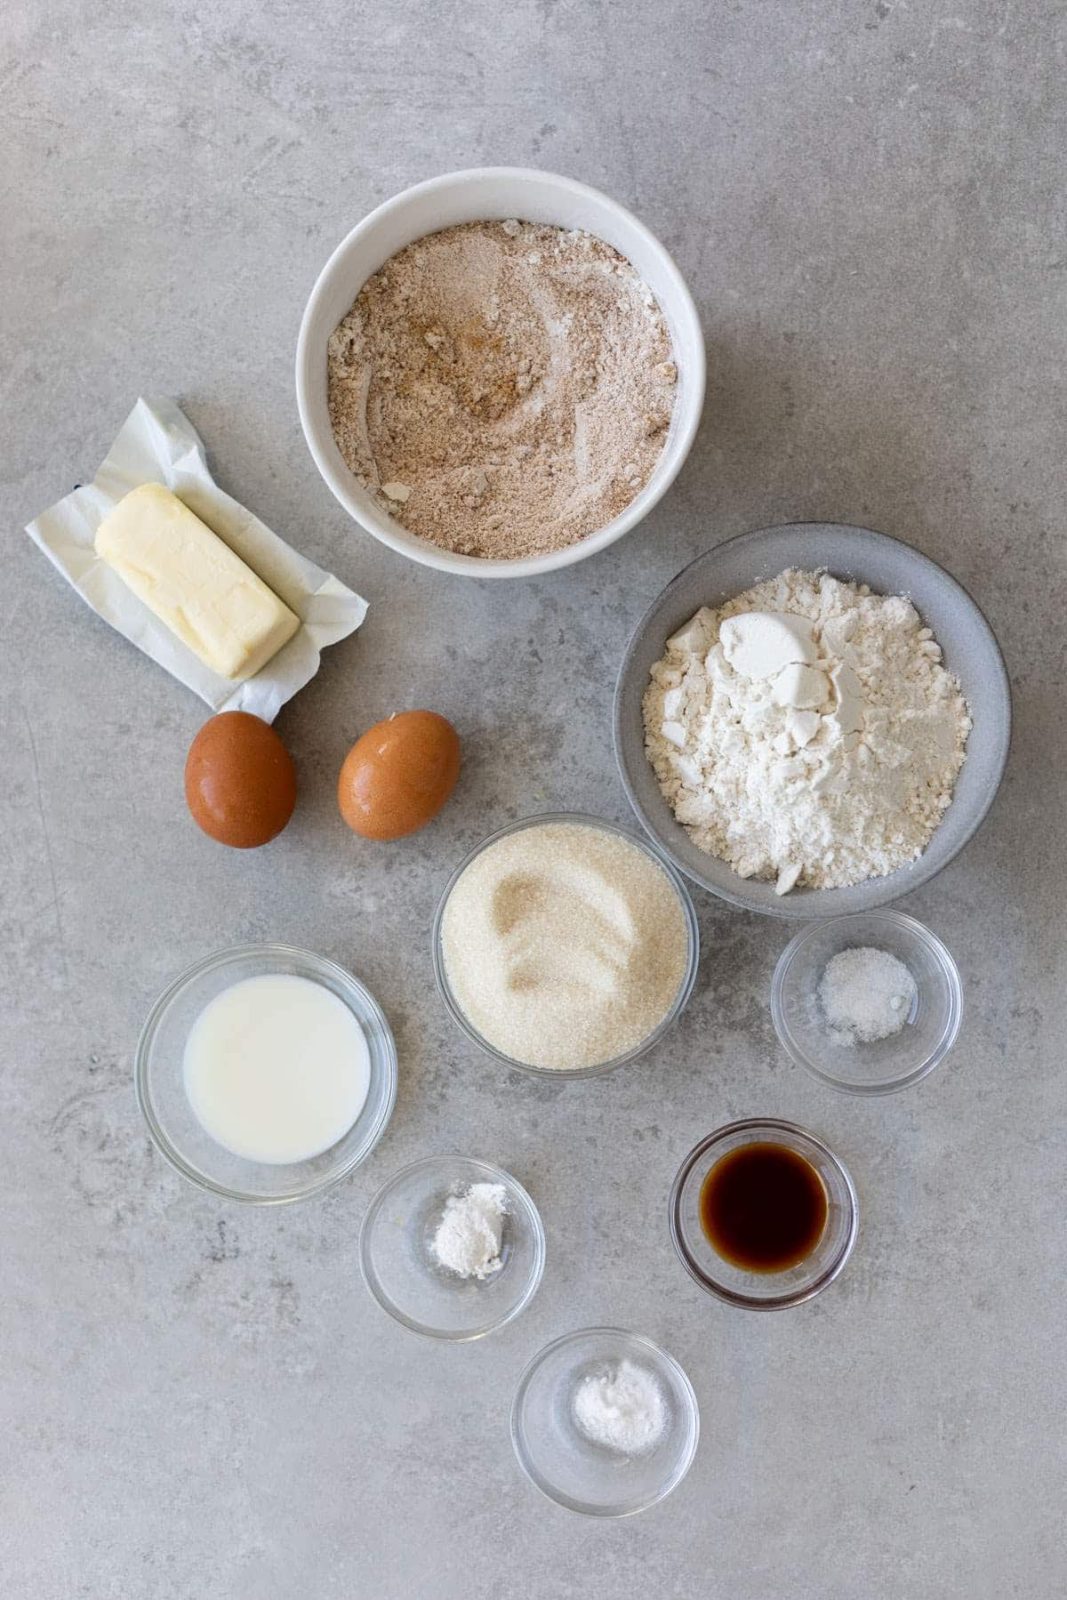 Coffee Cake ingredients including butter, eggs, flour, sugar, streusel, vanilla, and baking powders